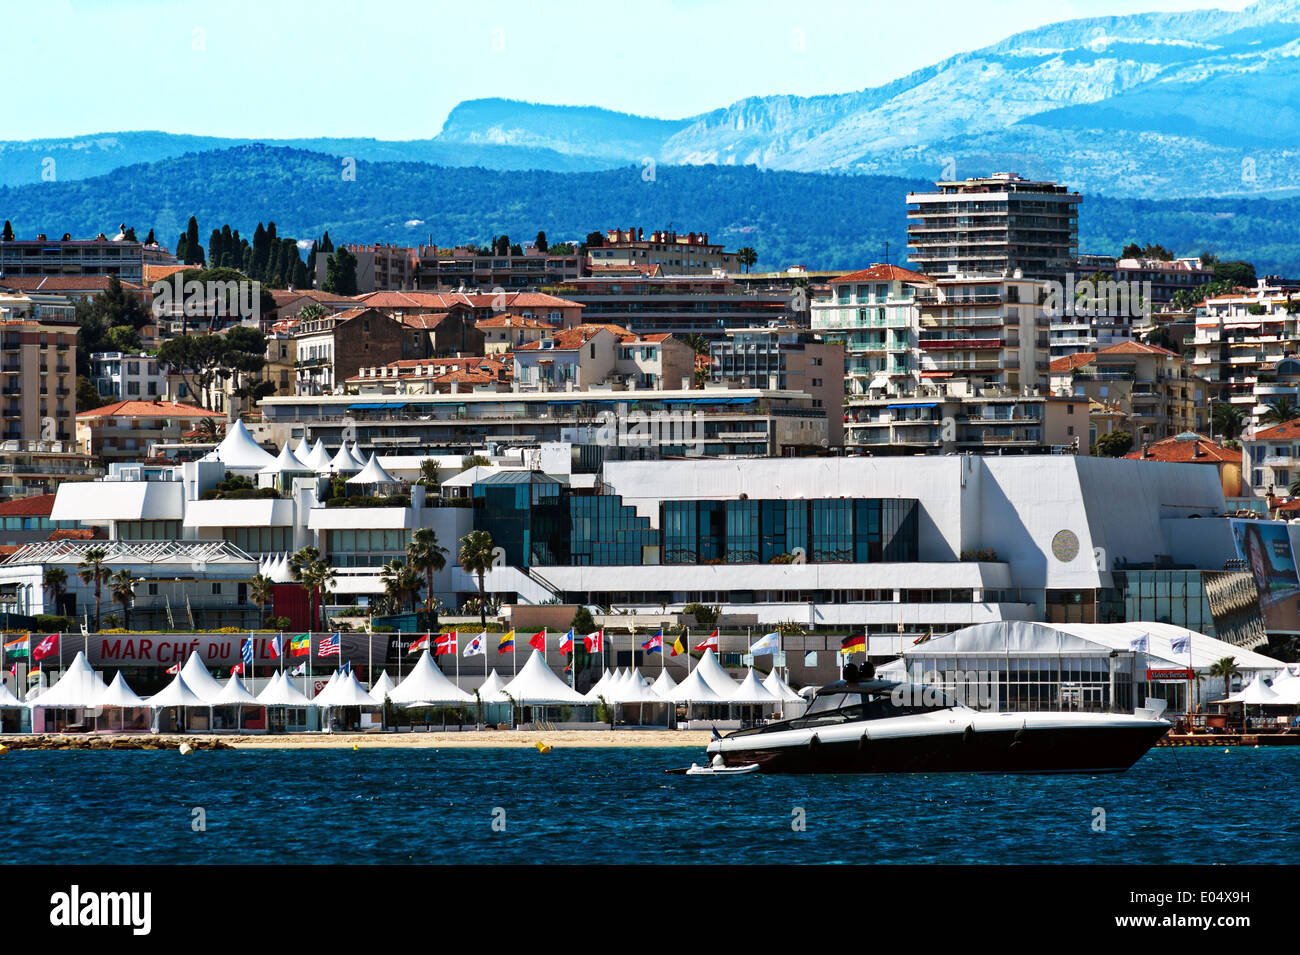 Europe, France, Alpes-Maritimes, Cannes. Festival palace during the festival film. Stock Photo